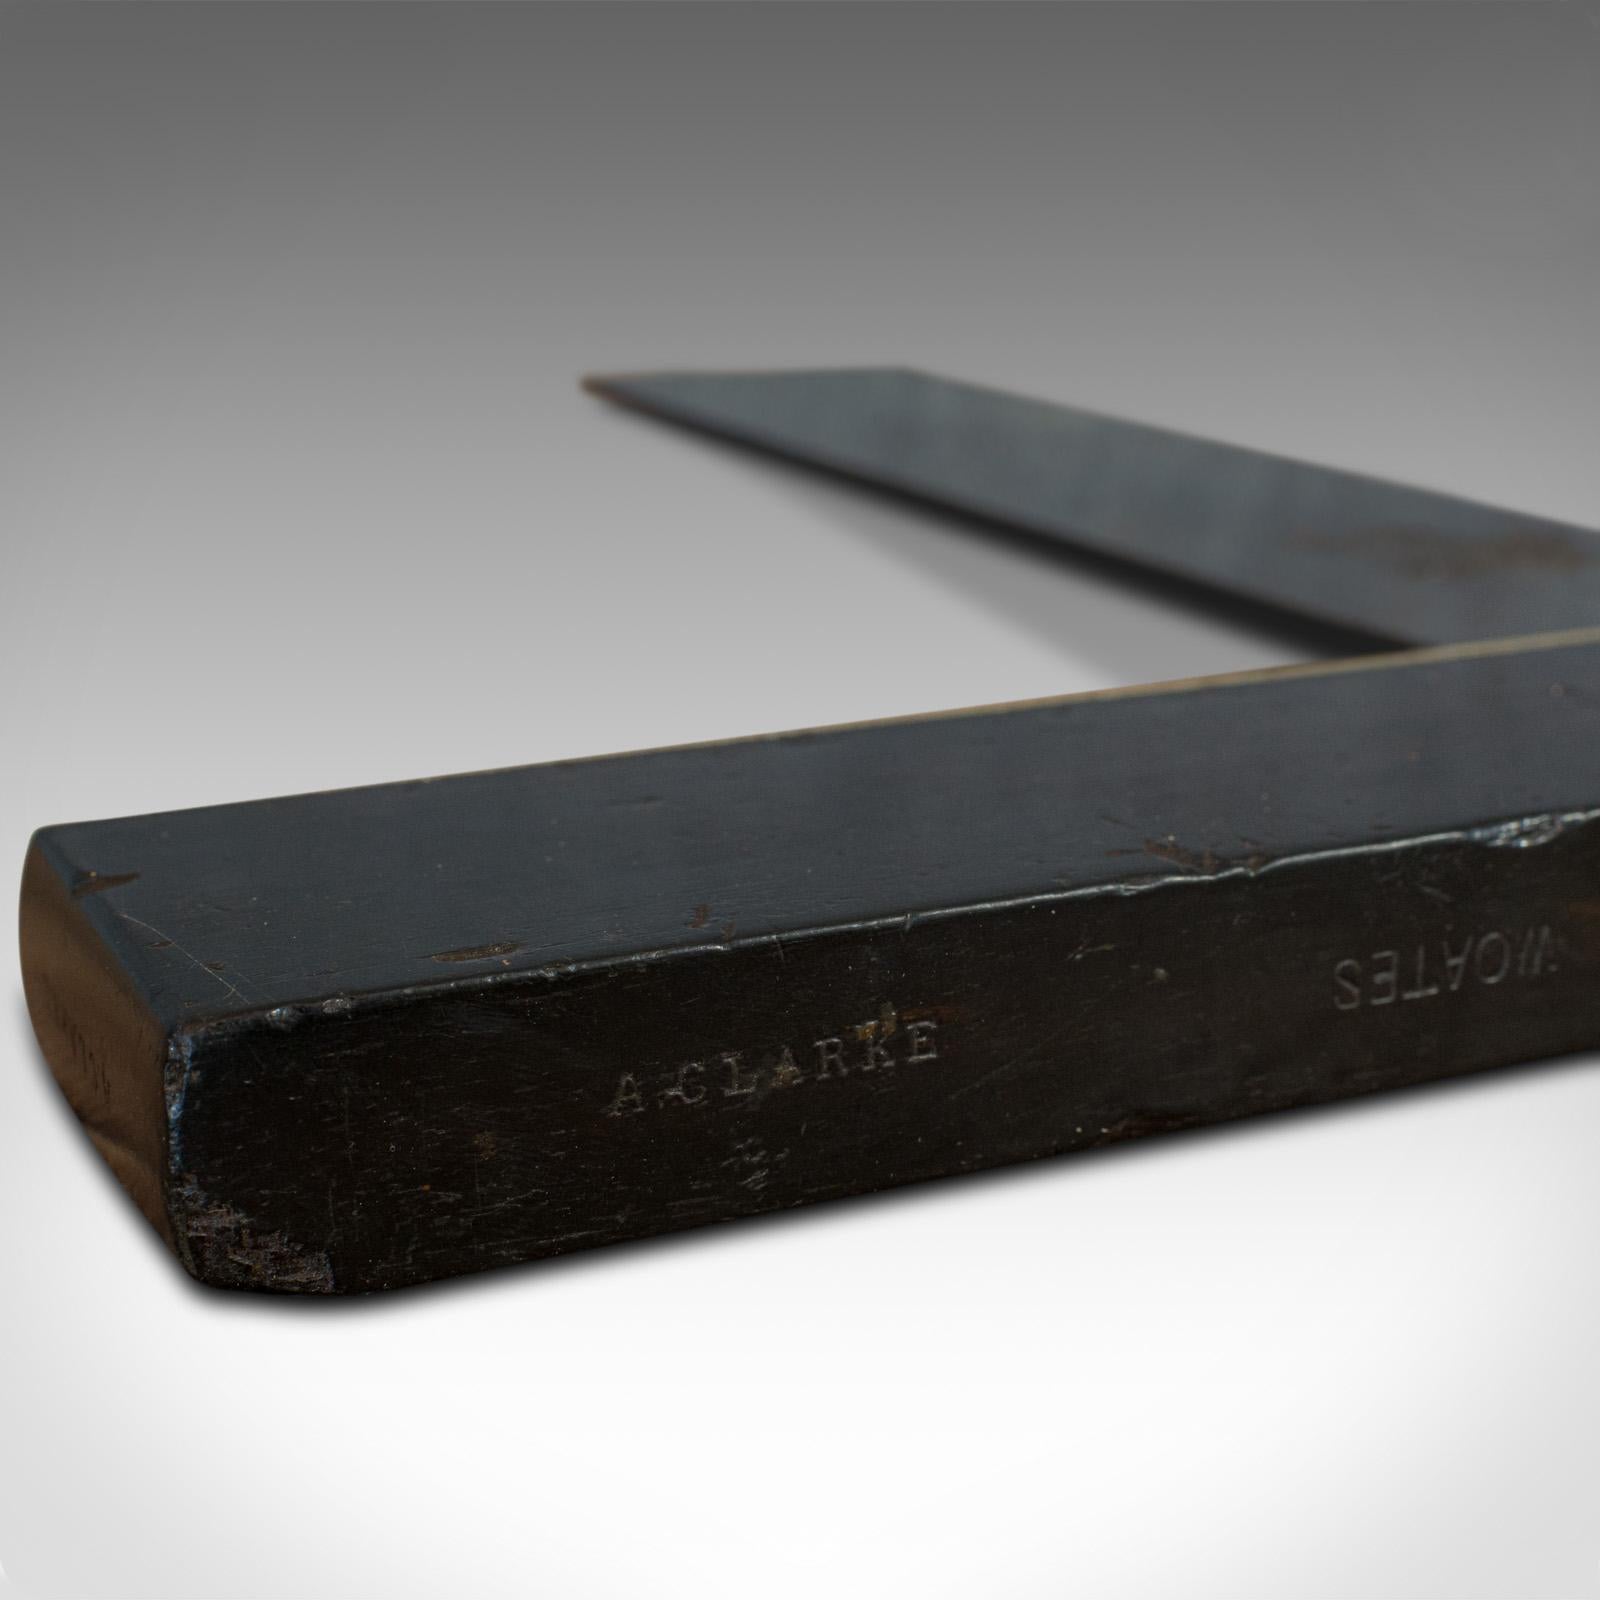 Large Antique Shipwright's Set Square, English, Rosewood, Tool, Victorian, 1880 For Sale 2